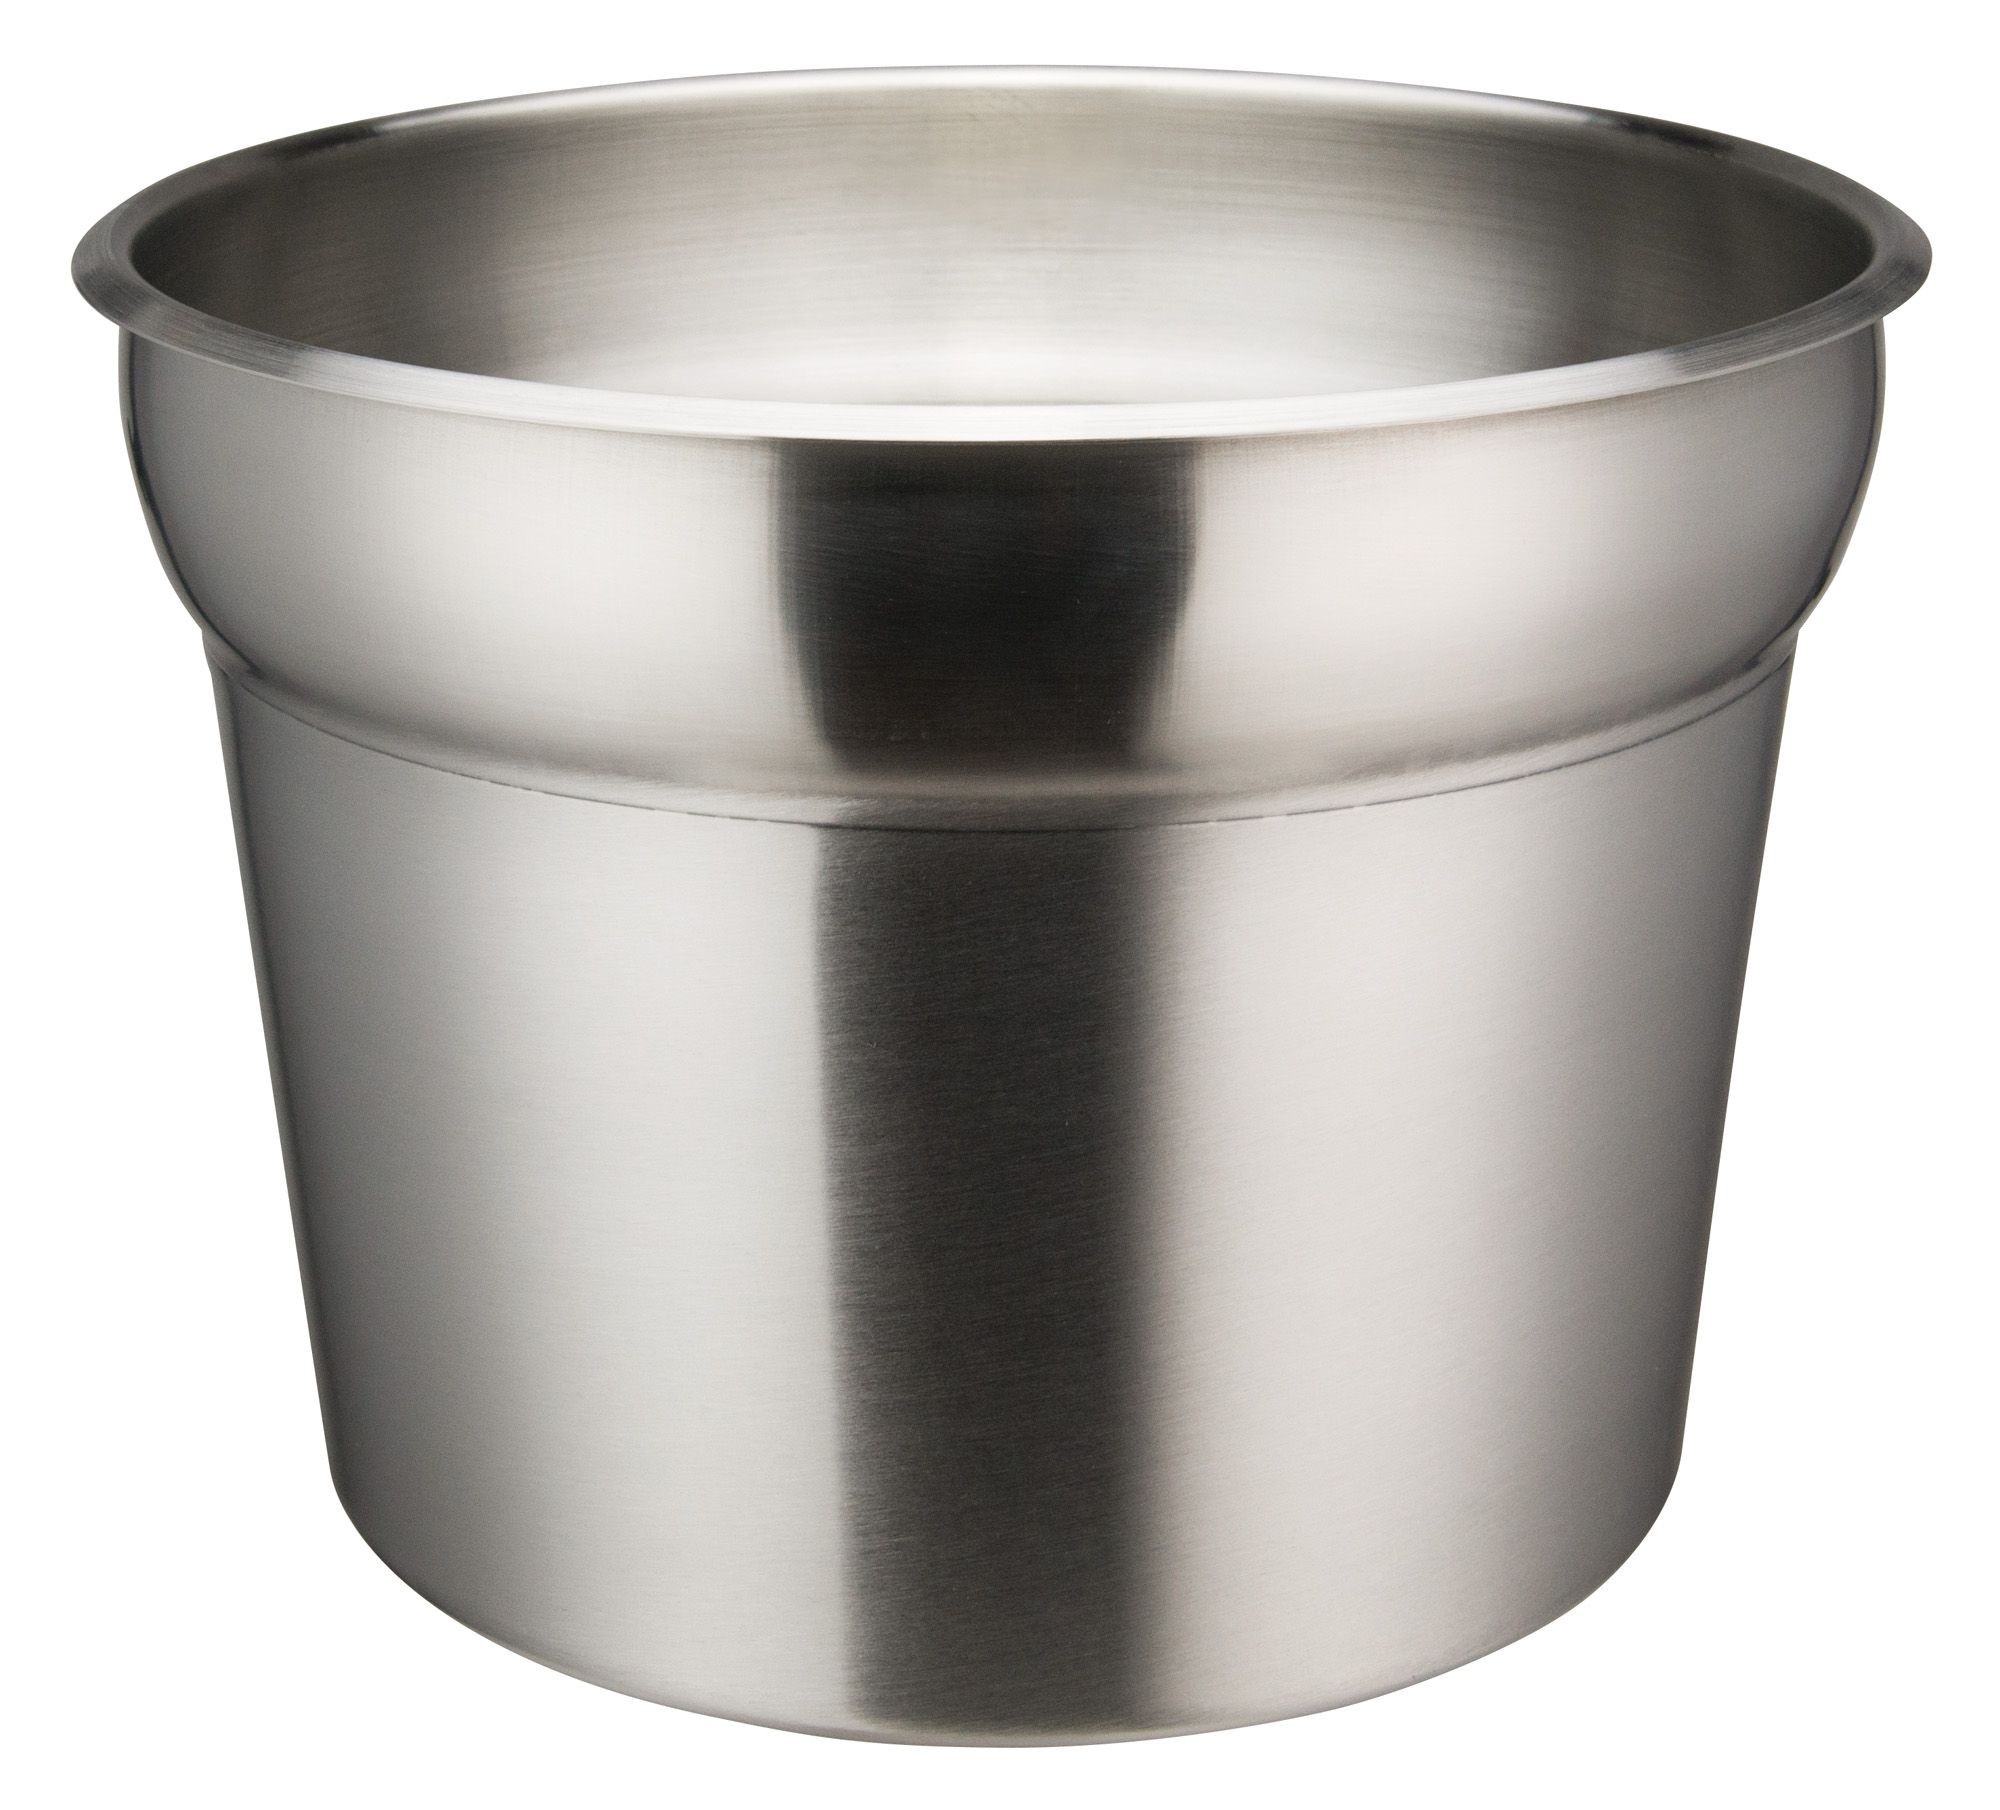 Winco INSN-11 Prime Stainless Steel 11 Qt. Inset